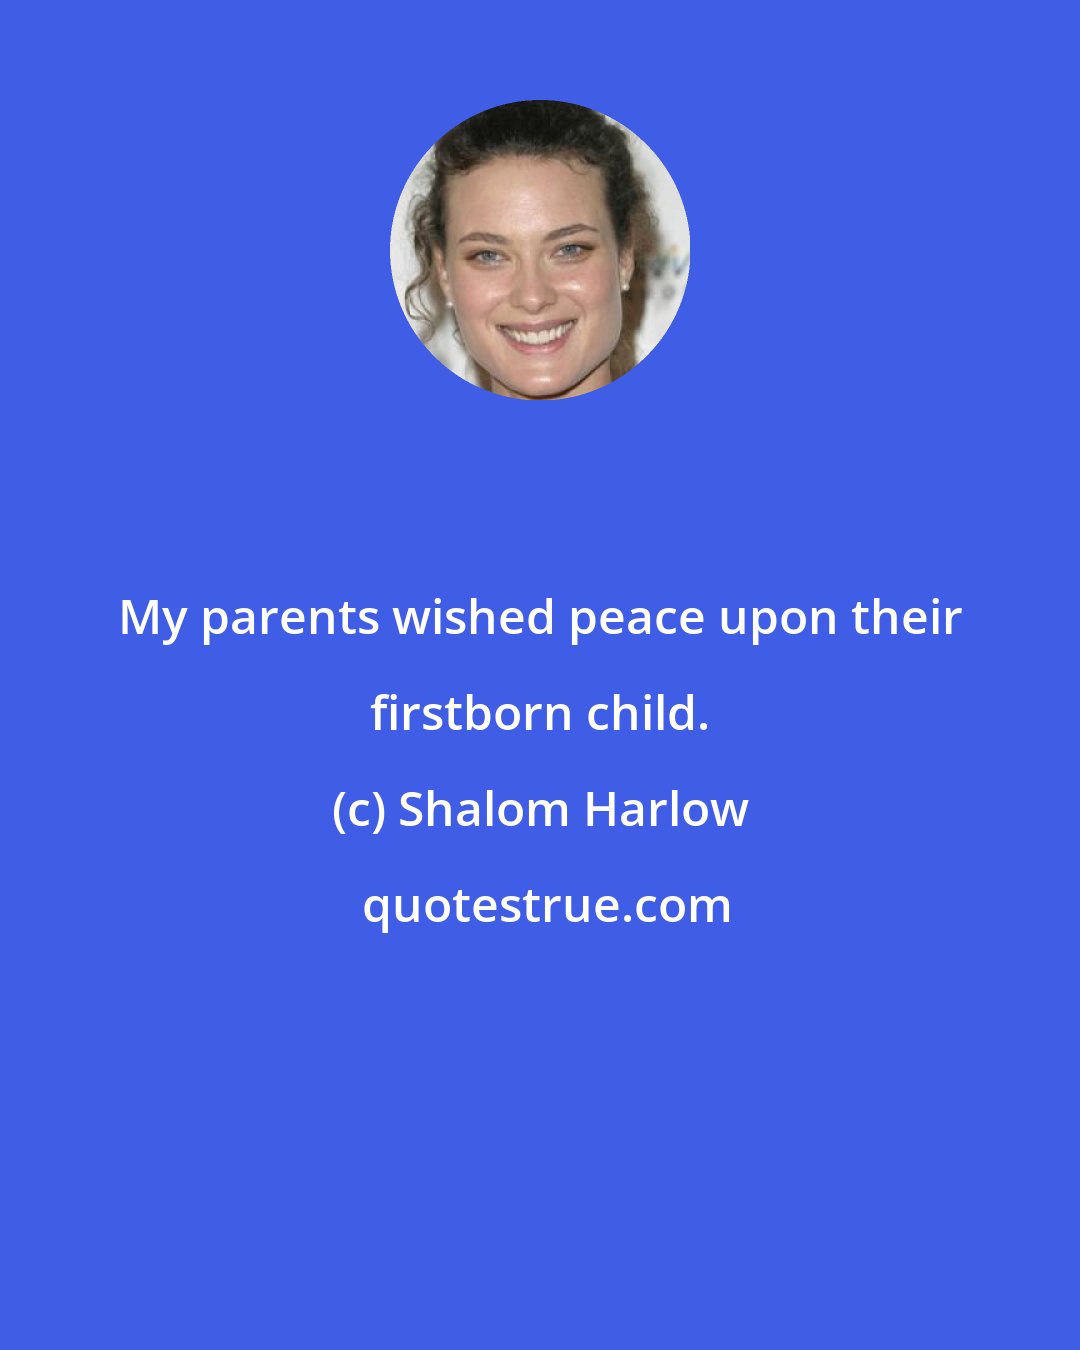 Shalom Harlow: My parents wished peace upon their firstborn child.